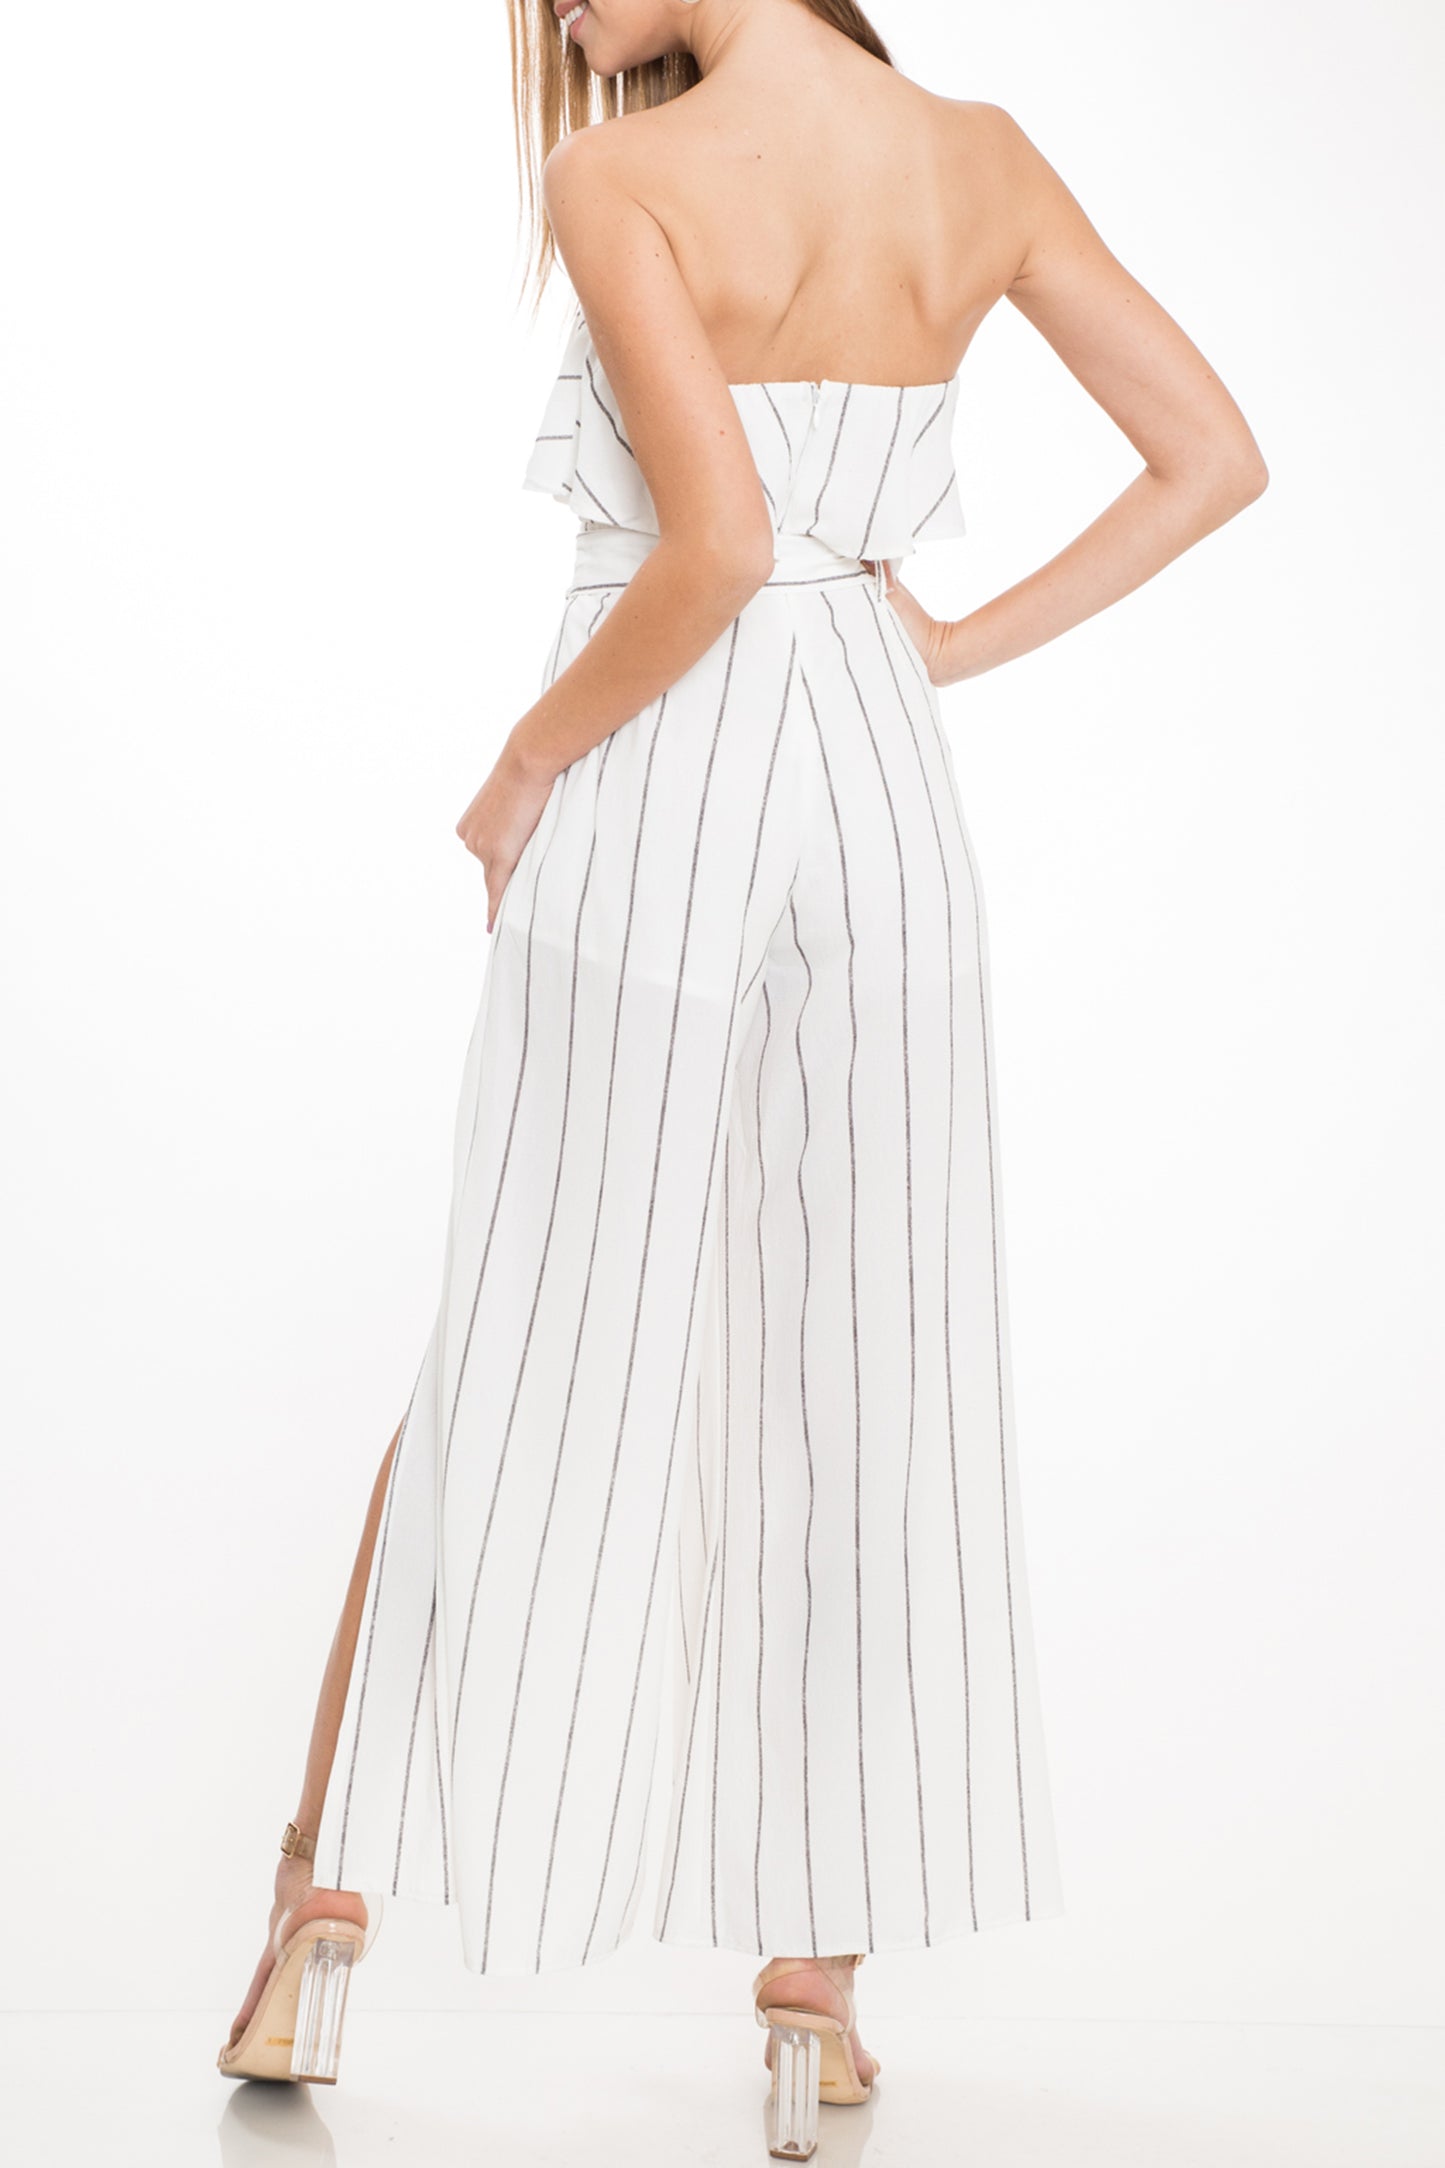 Fashion Strapless Ruffle White Contrast Cut Out Jumpsuit